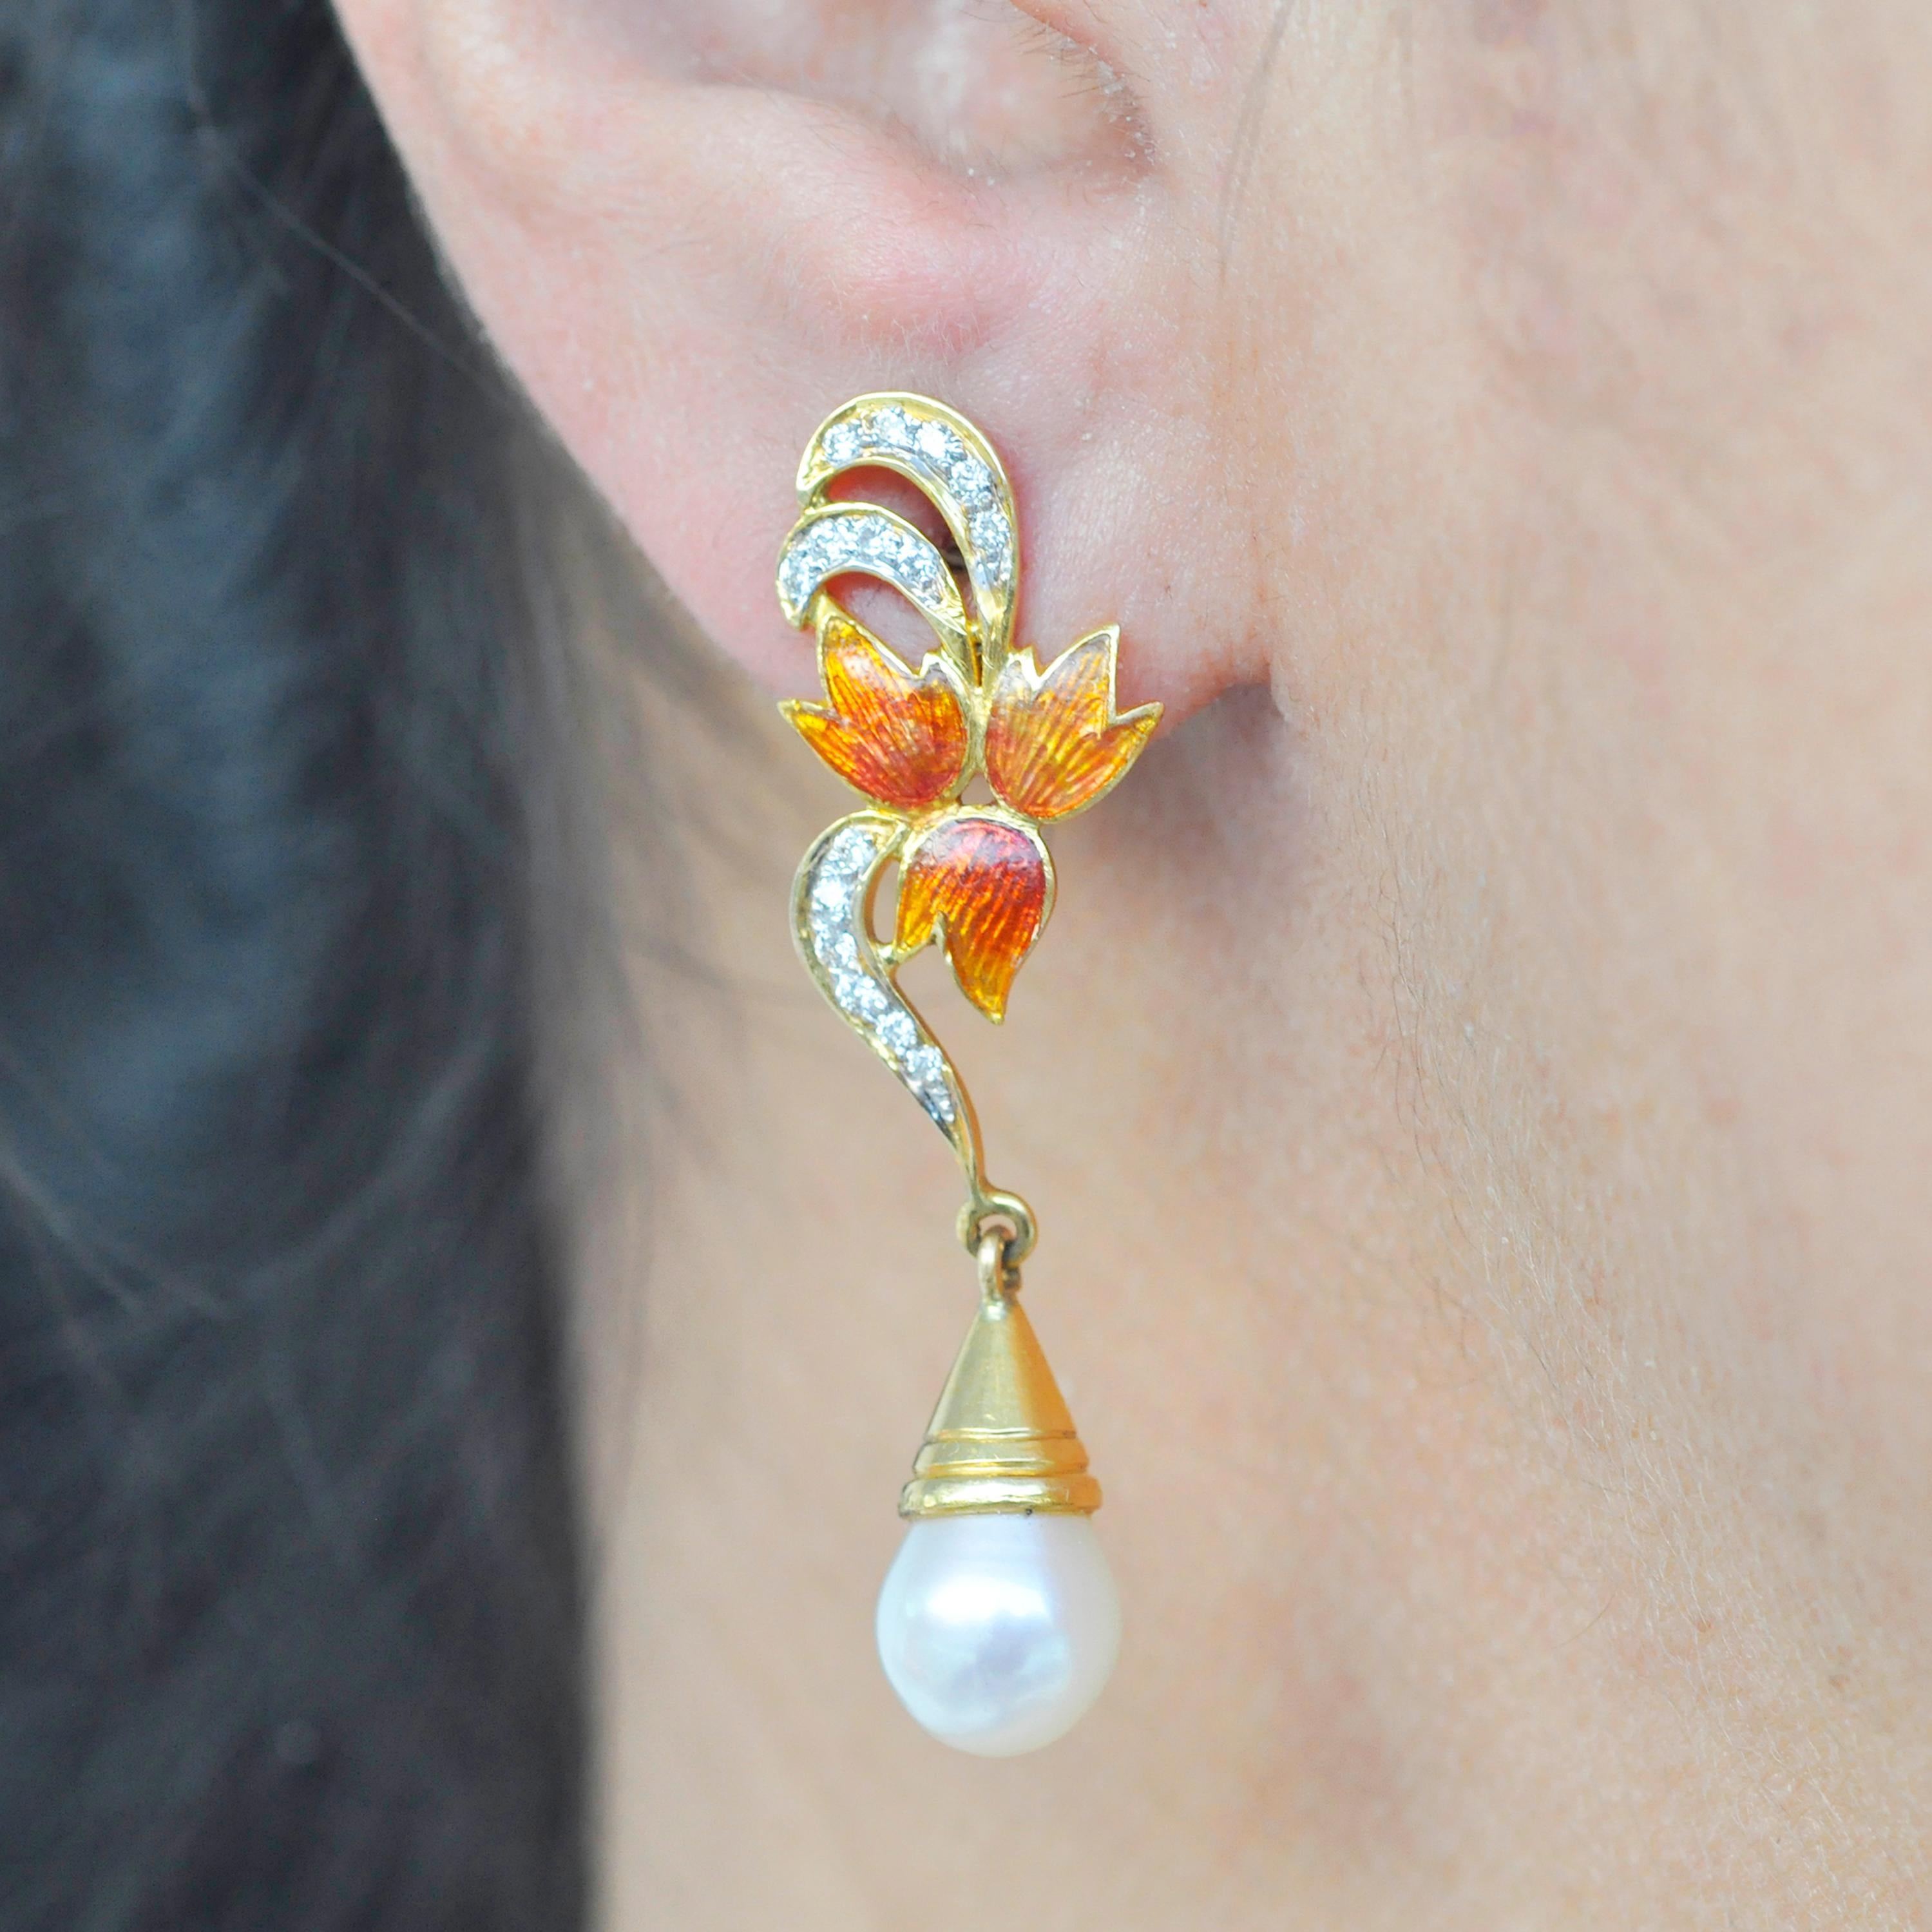 18 karat yellow gold autumn maple leaf guilloché french enamel diamond pearl dangle drop earrings

These elegant earrings captures the beauty of autumn. The beauty of these dangle drop earrings lies in the gradation from dark to light orange using